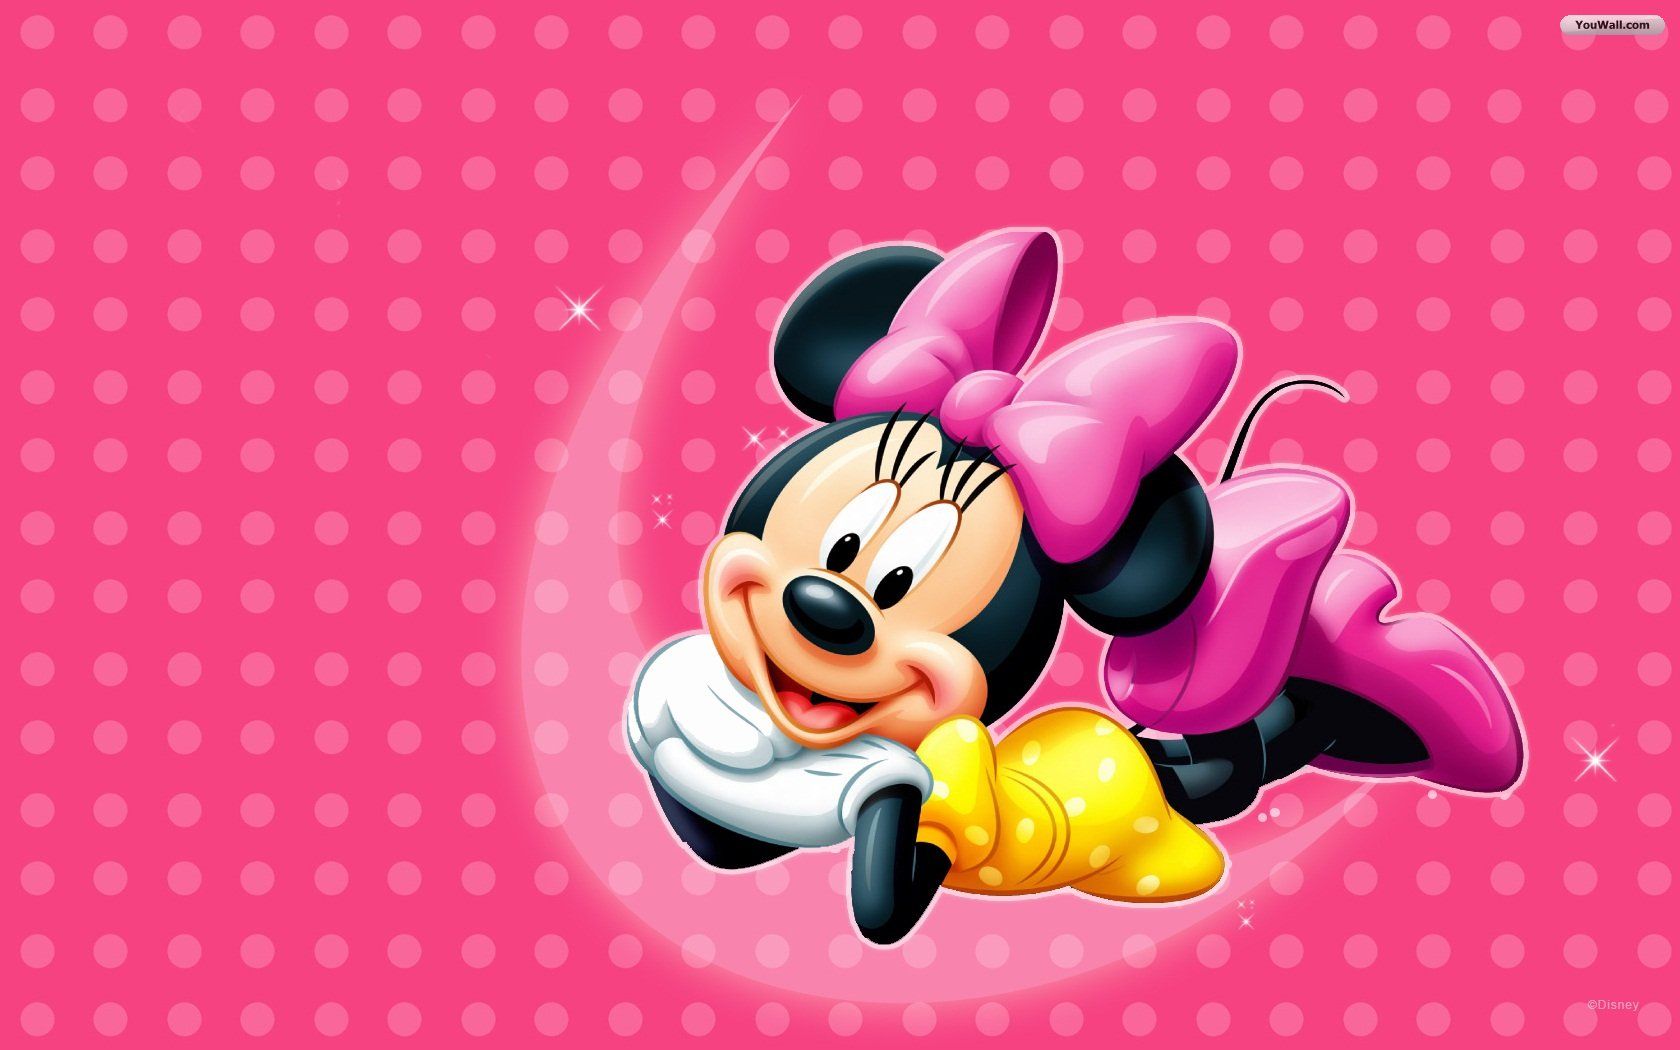 Minnie Mouse Wallpaper for iPad